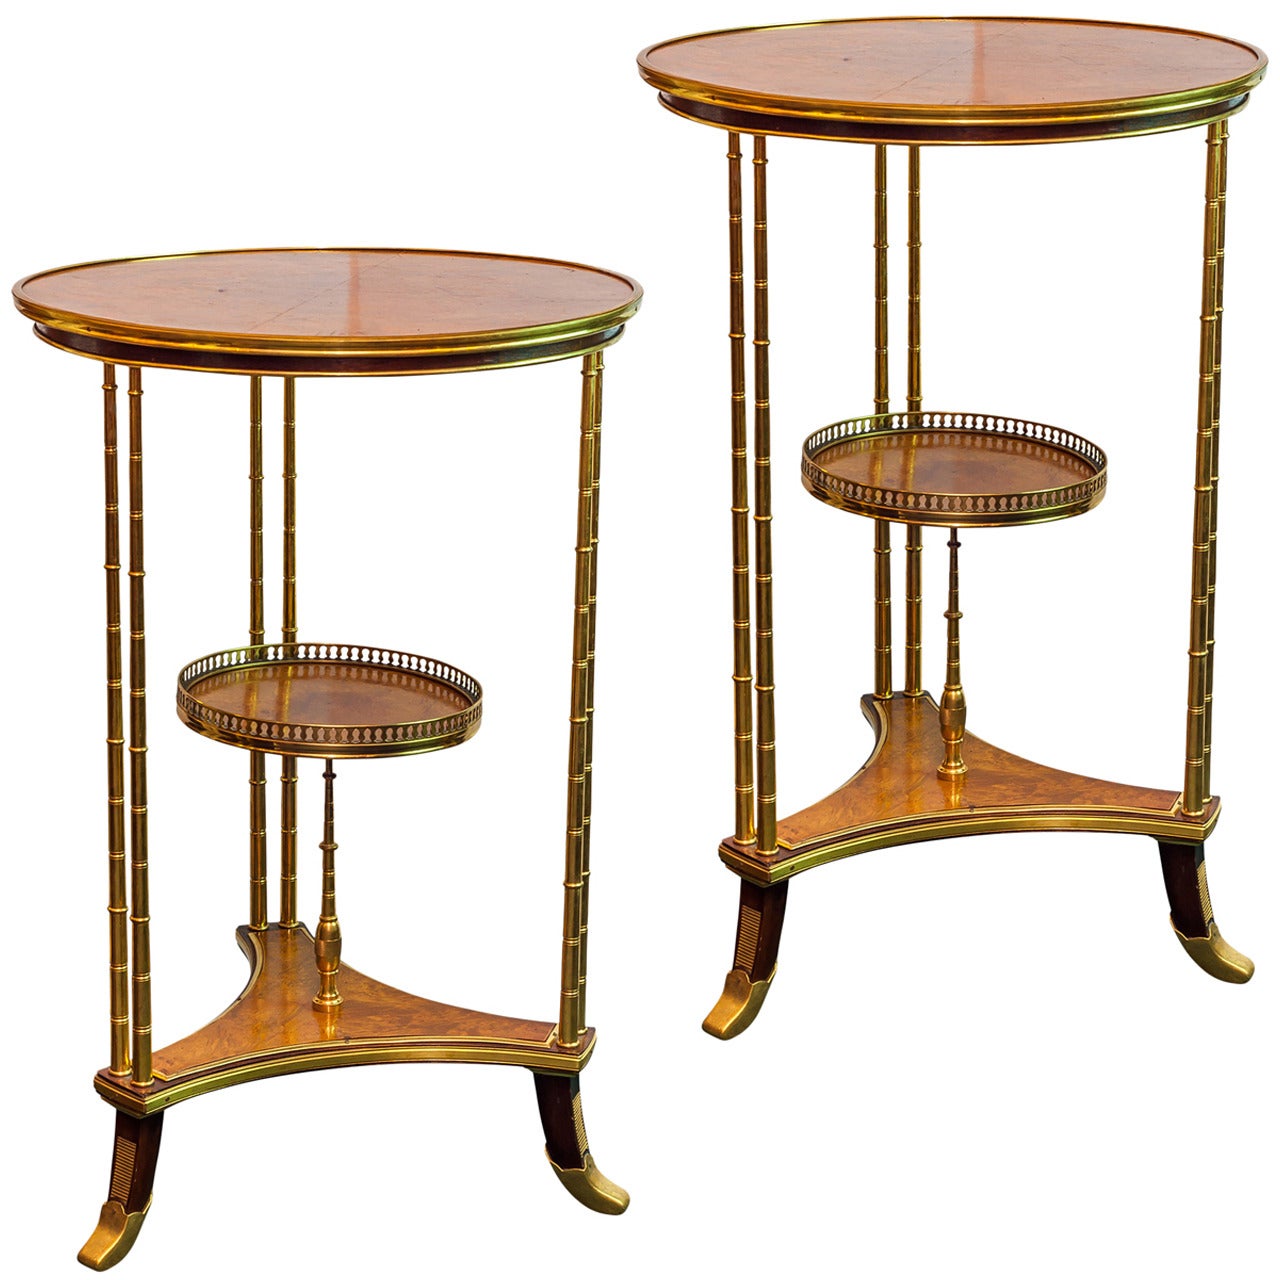 Pair of Russian Empire Style Neoclassical Bronze-Mounted Round Side Tables